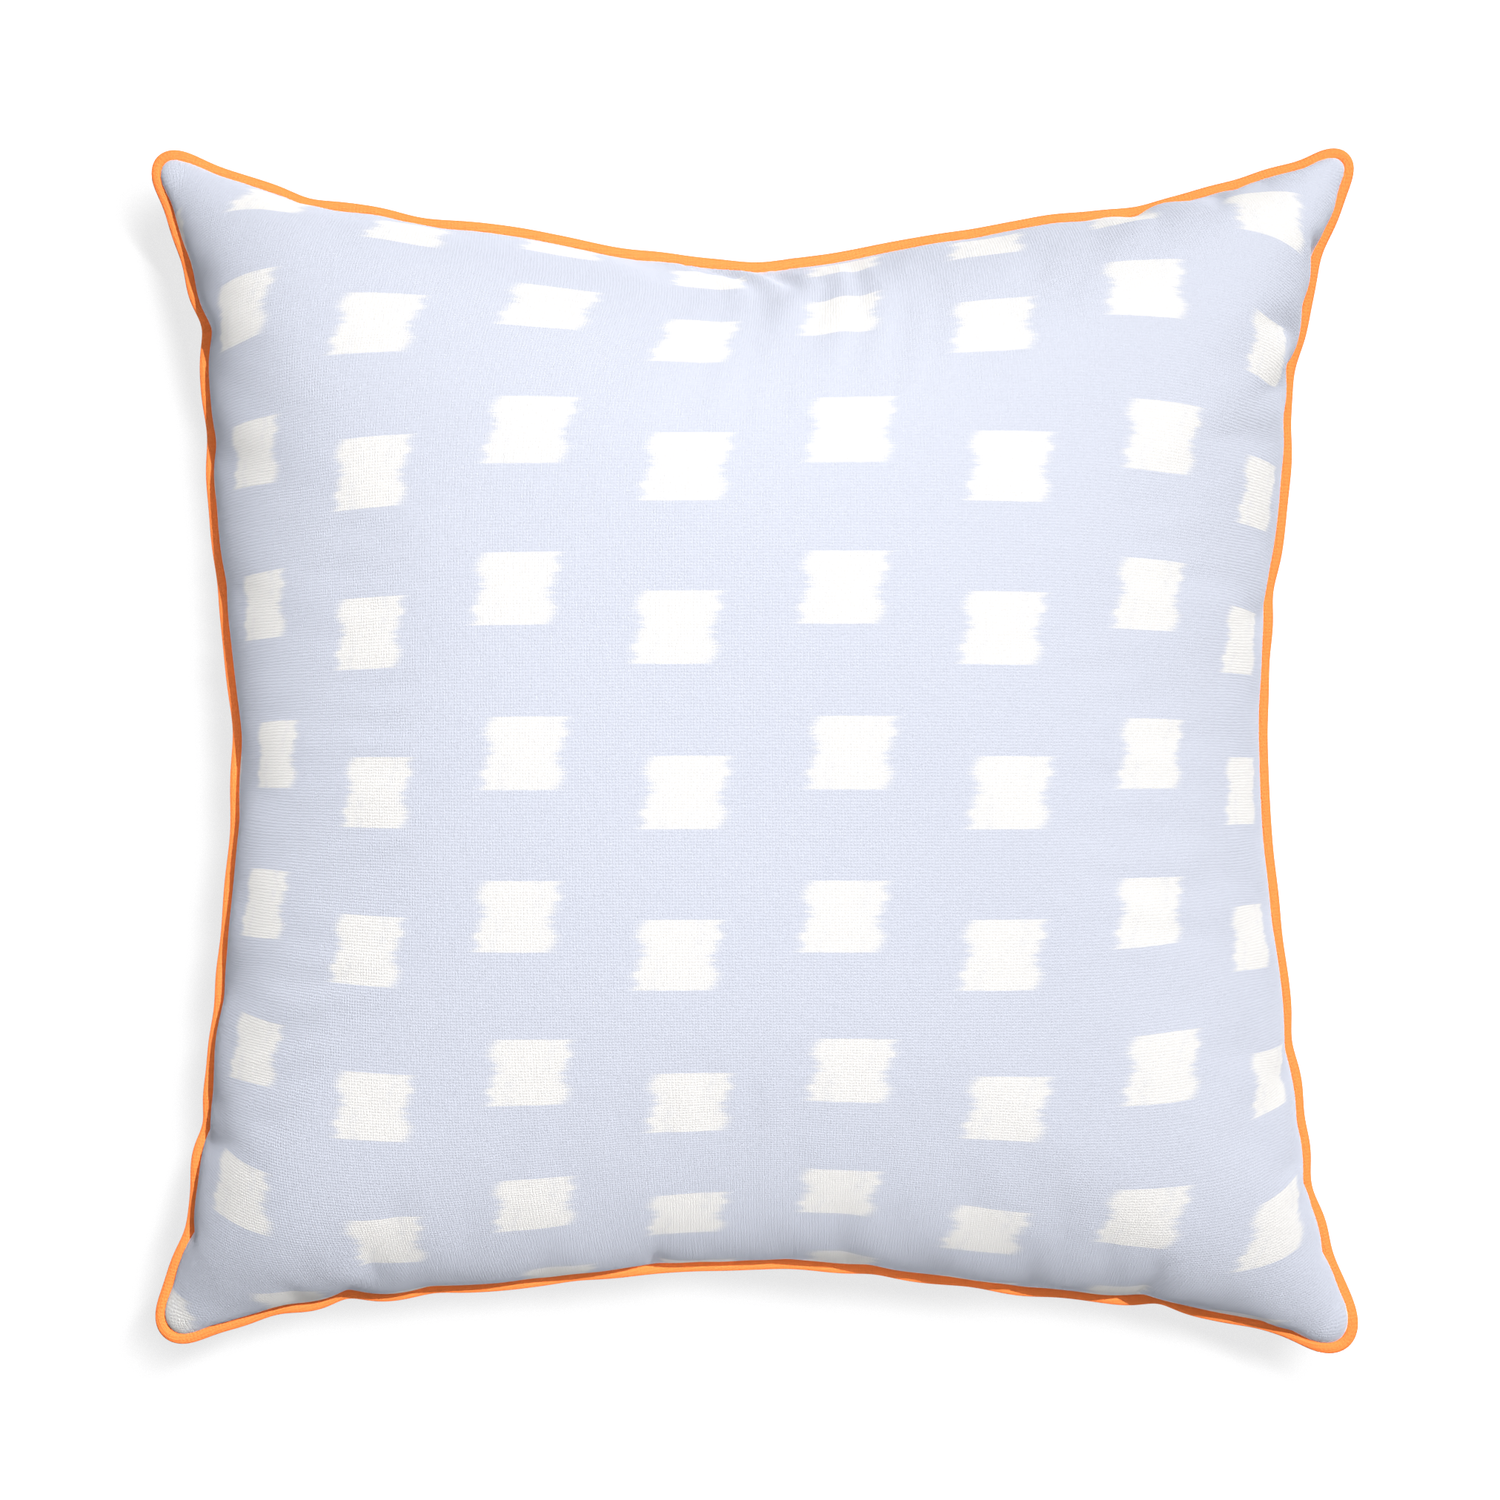 Euro-sham denton custom sky blue patternpillow with clementine piping on white background